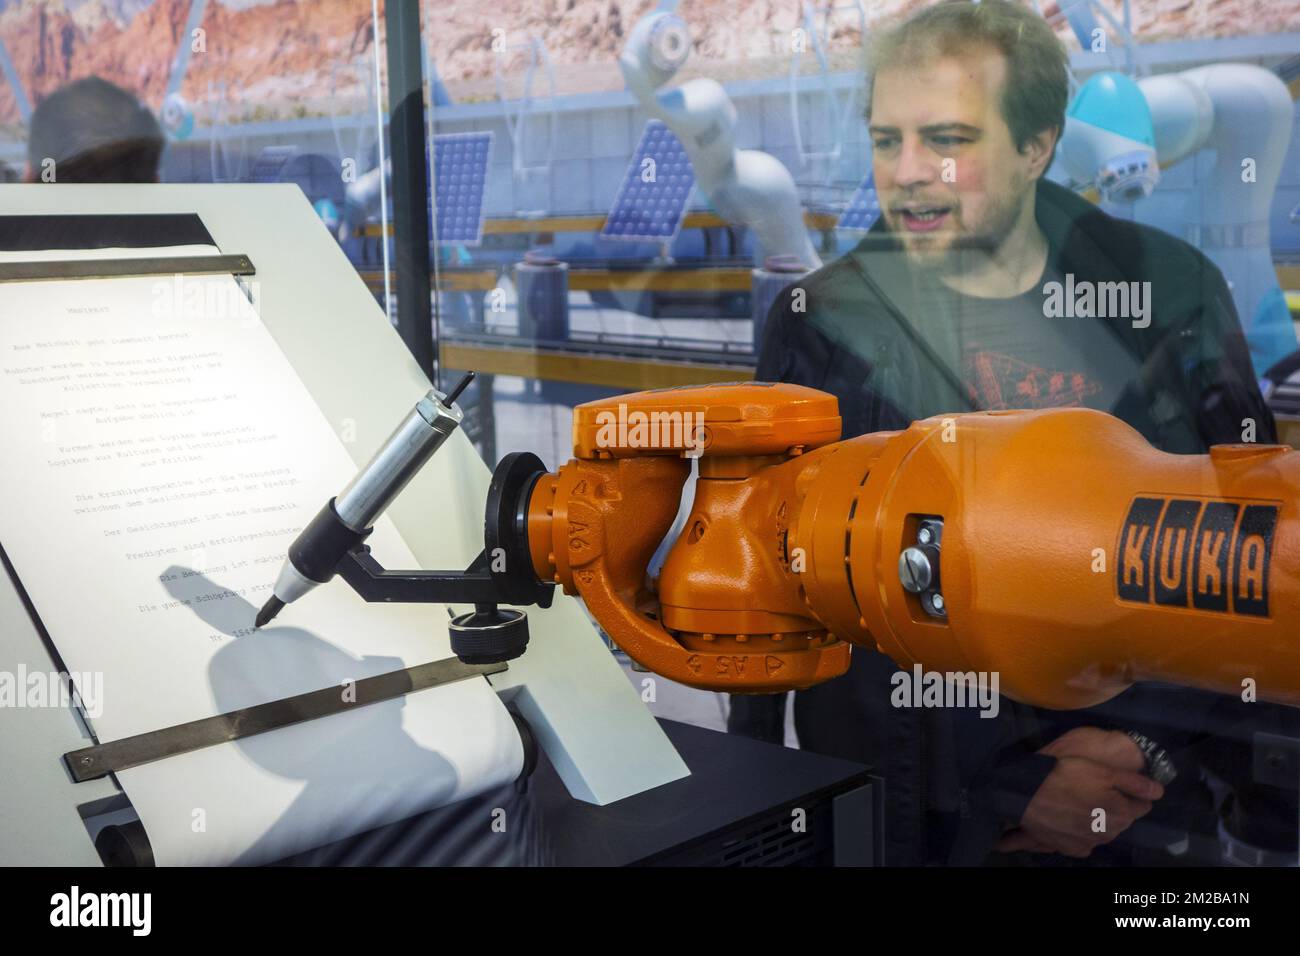 KUKA, industrial robot arm writing text during demonstration about robotics and AI artificial intellingence | KUKA, robot industriel pendant démonstration concernant la robotique et intelligence artificielle 26/11/2017 Stock Photo